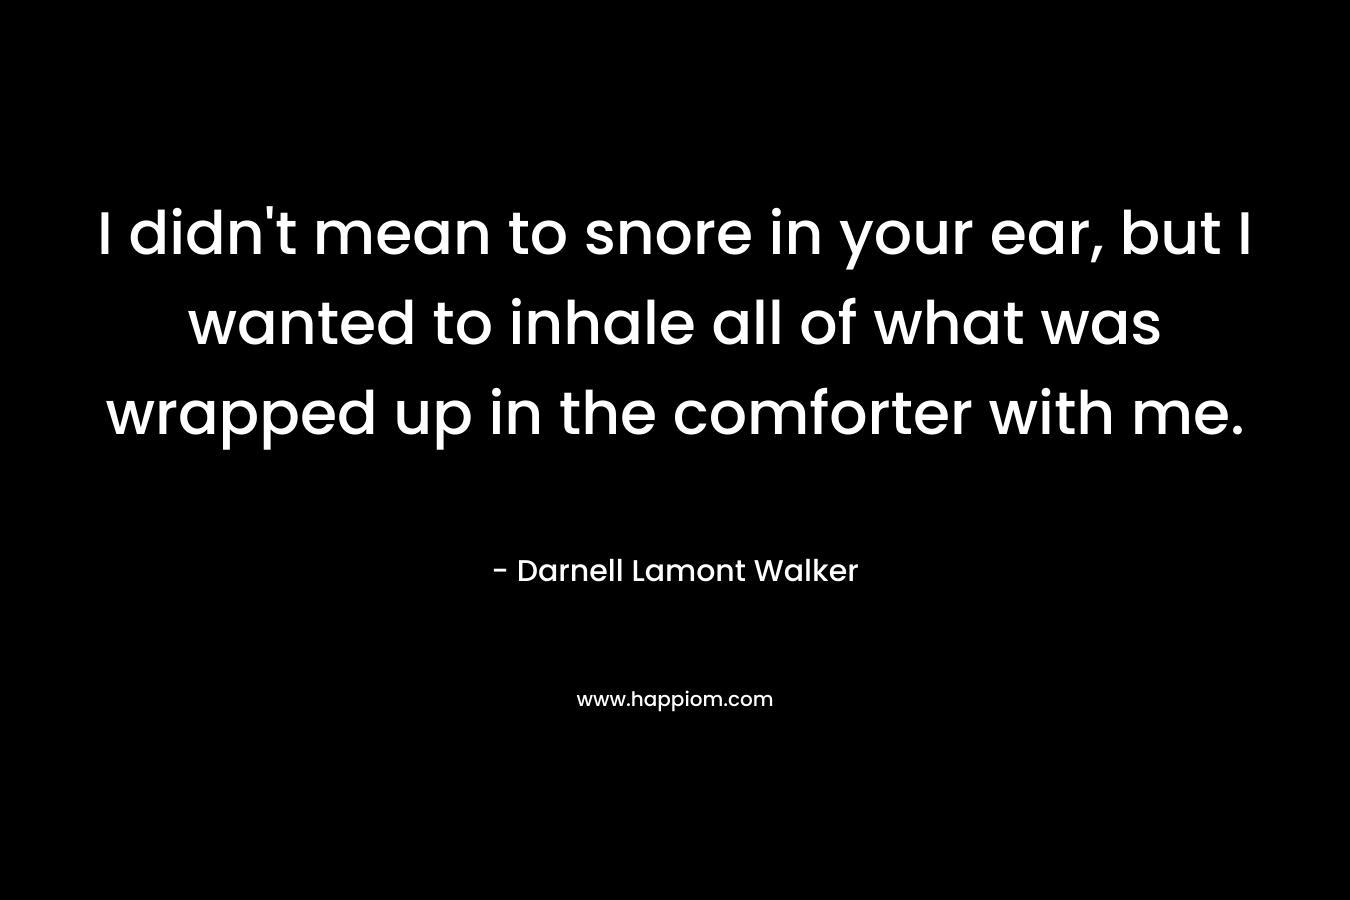 I didn’t mean to snore in your ear, but I wanted to inhale all of what was wrapped up in the comforter with me. – Darnell Lamont Walker